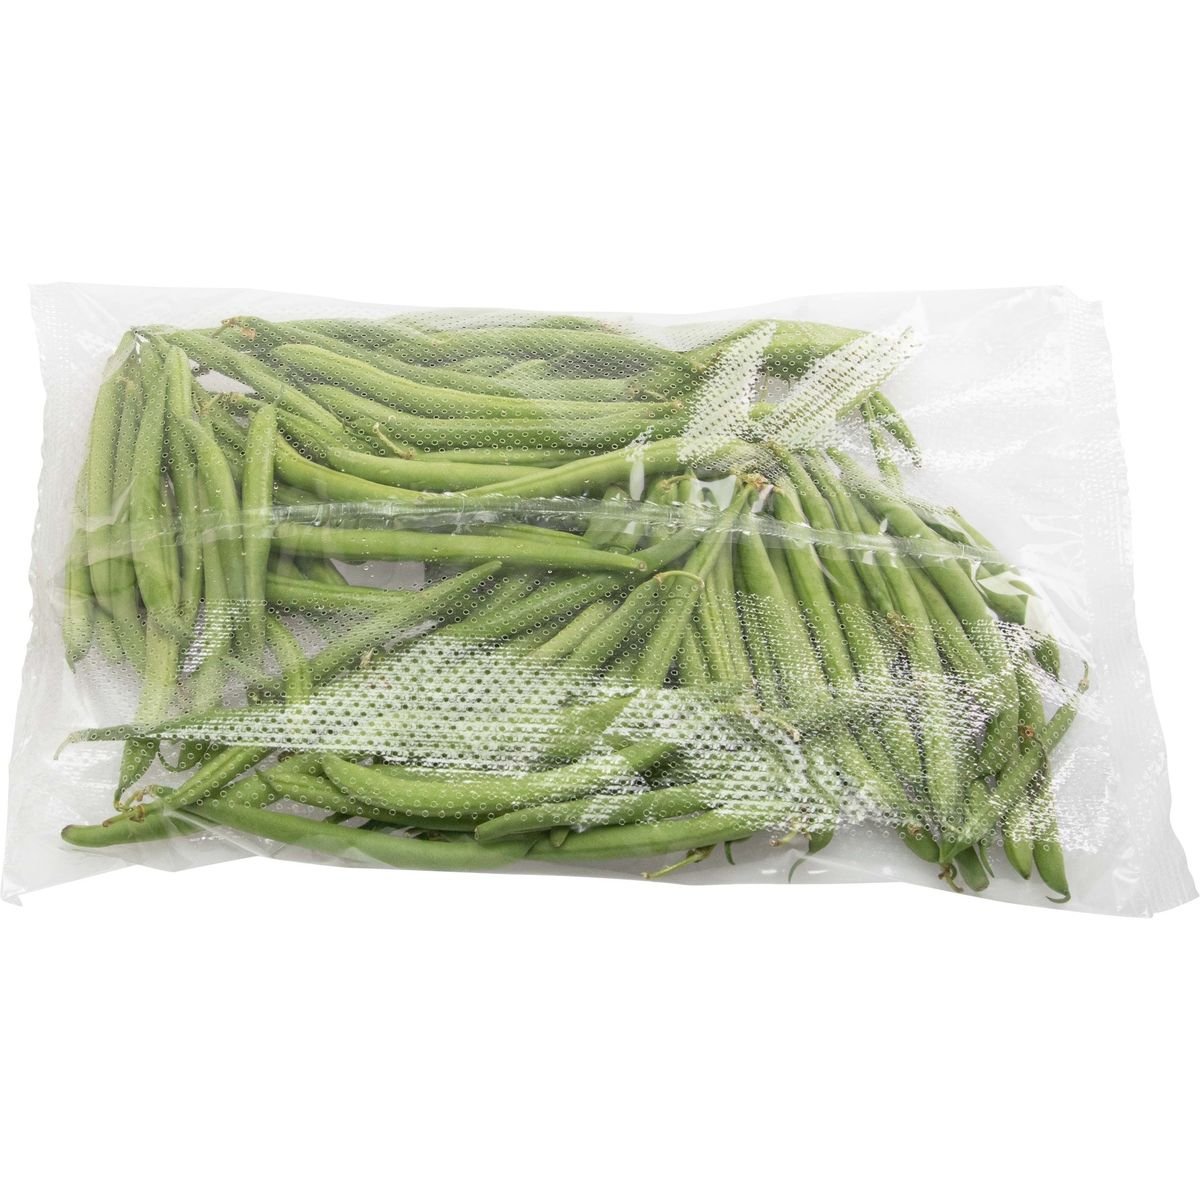 Carrefour Haricots Verts 500 g